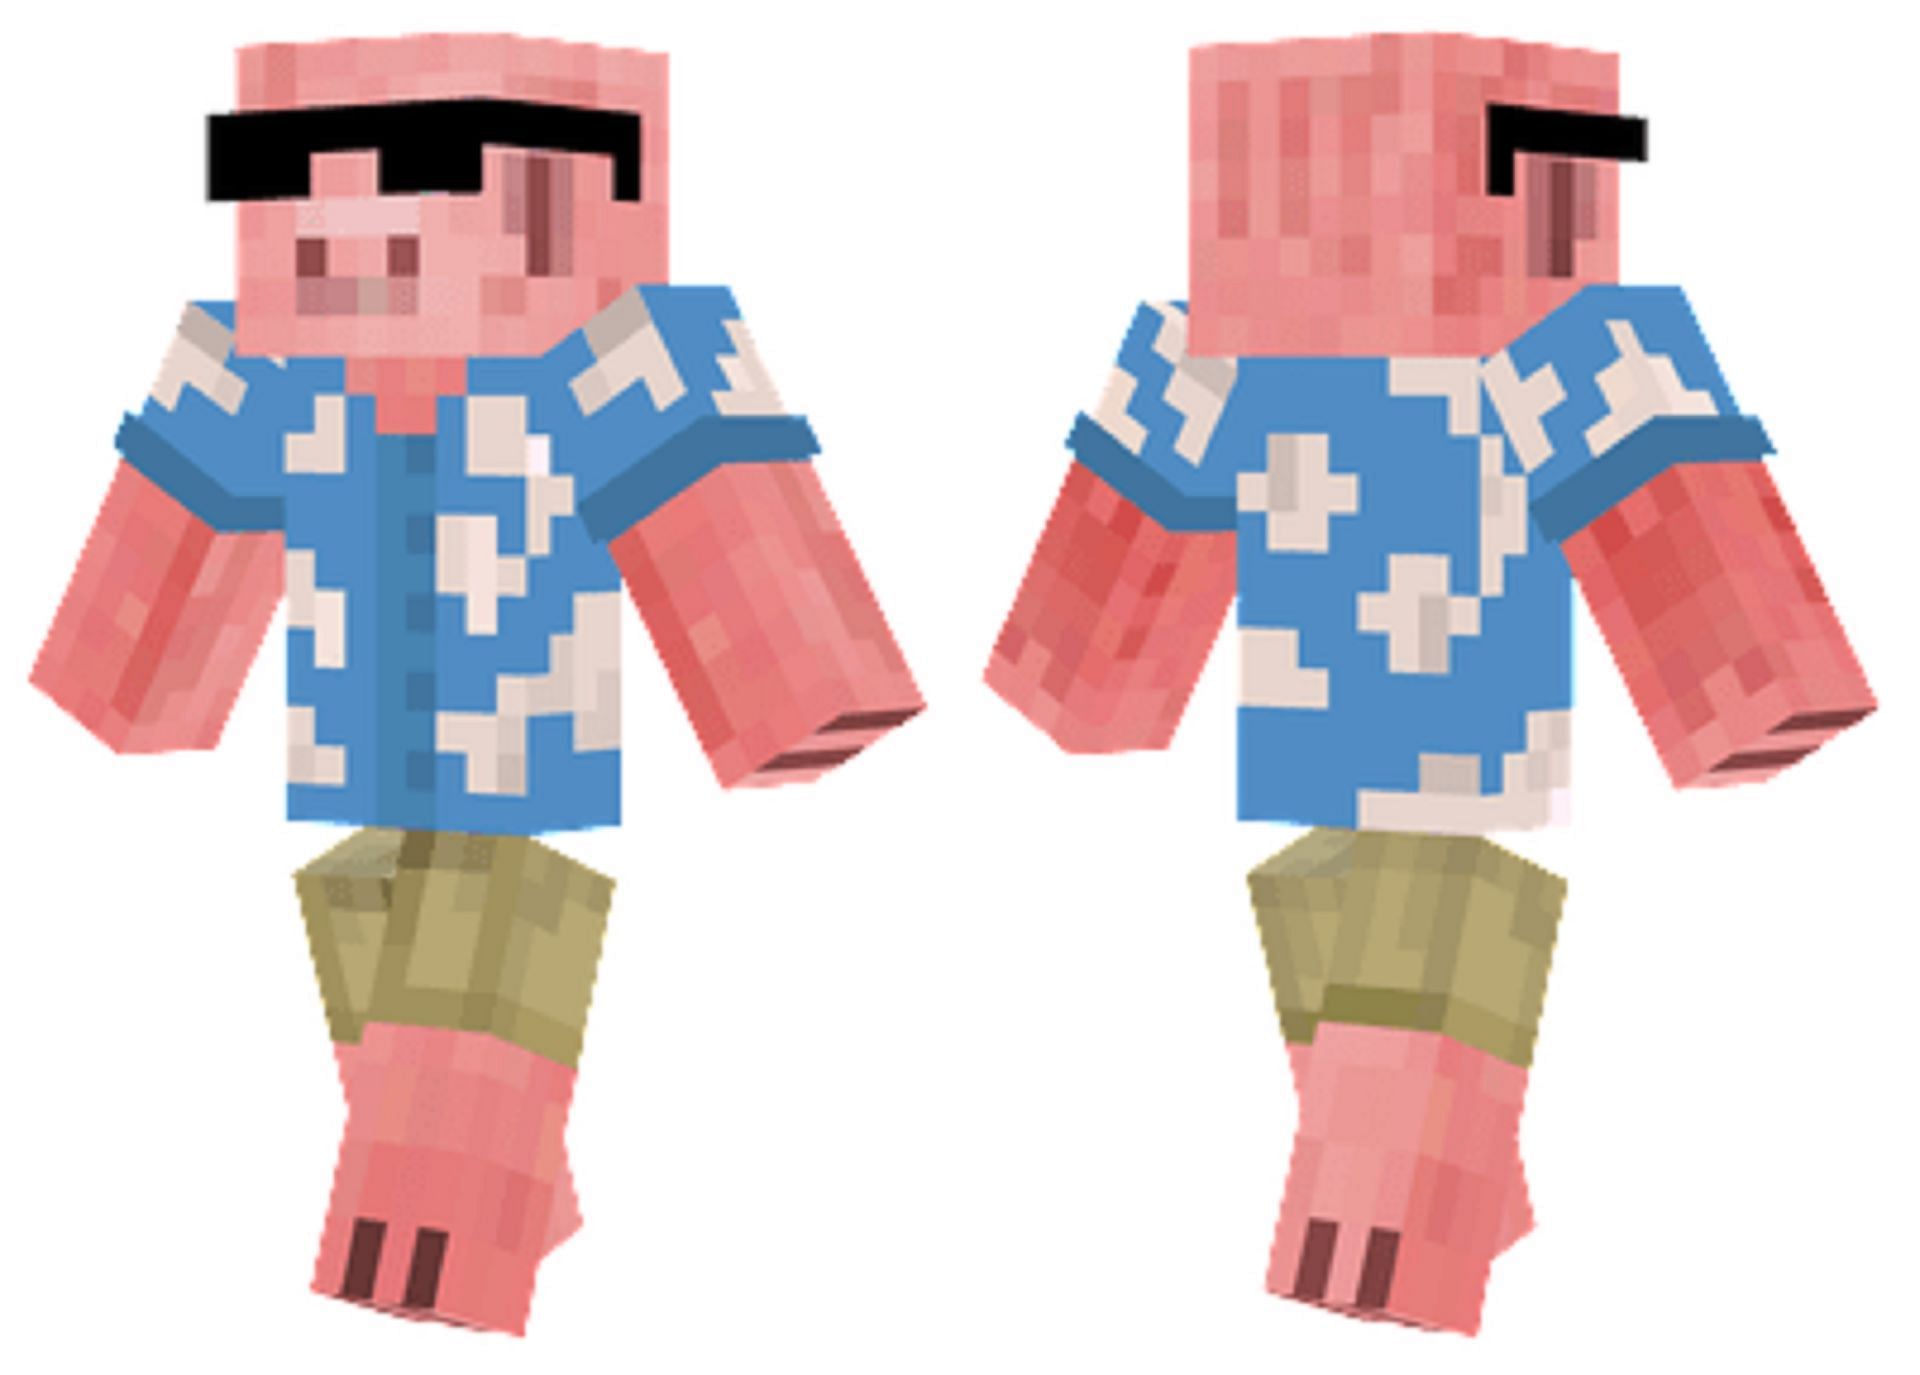 Be ready for the summer with this pig-themed skin (Image via IamJorgito/MinecraftSkins.net)